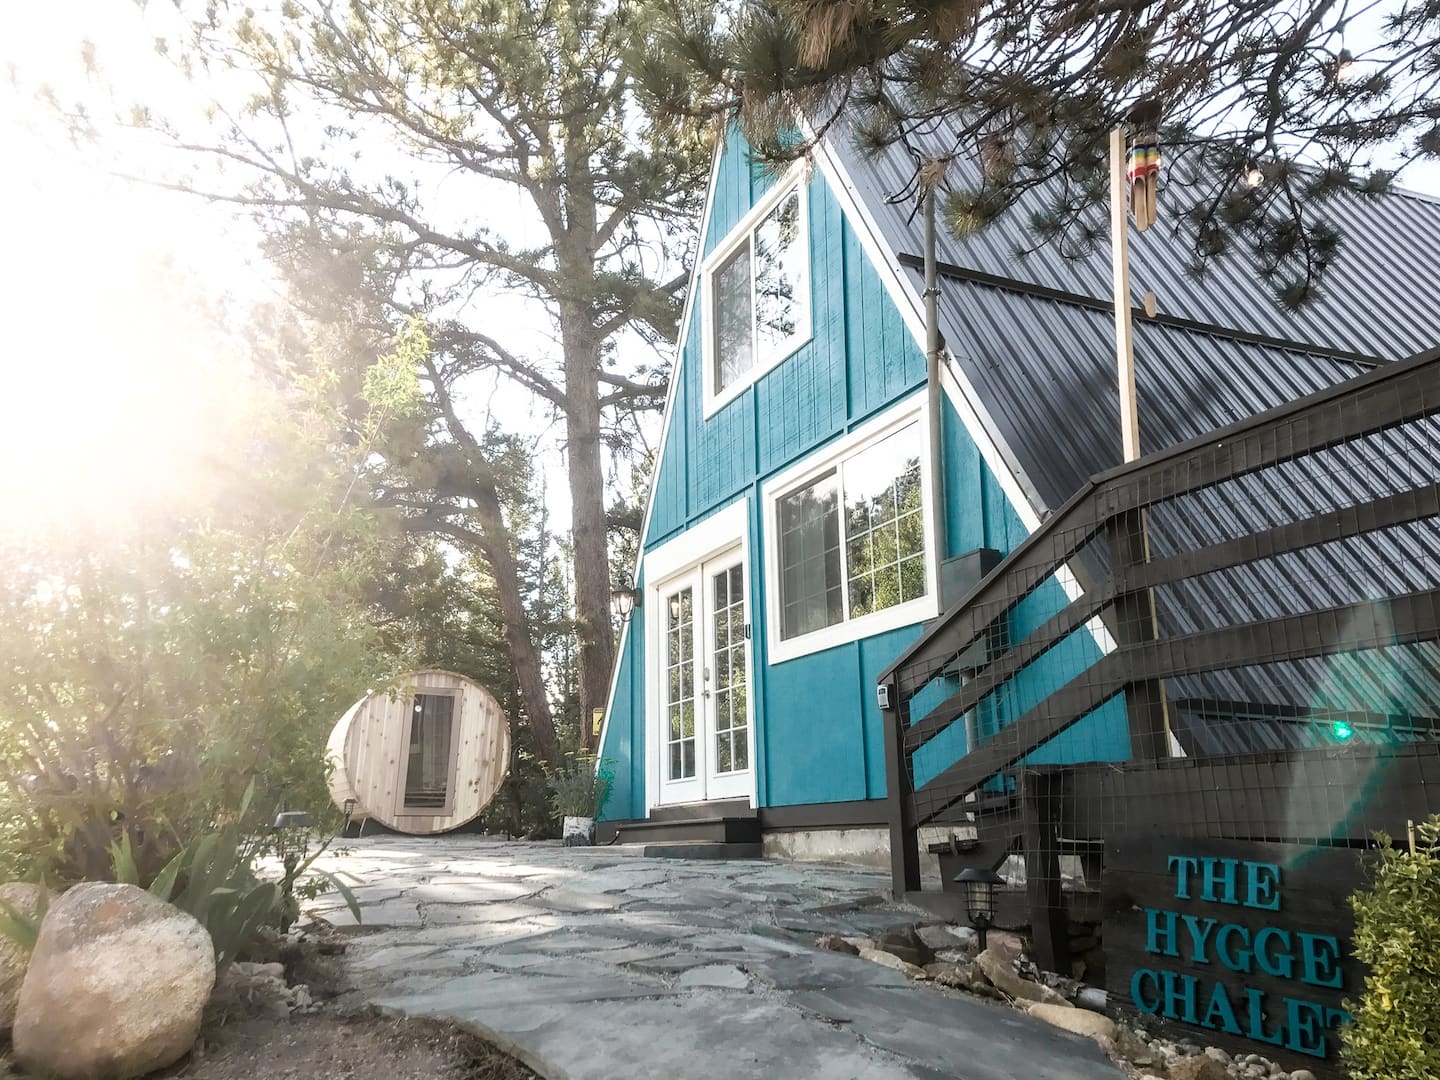 Hygge Chalet and Sauna, one of the best Colorado Airbnbs